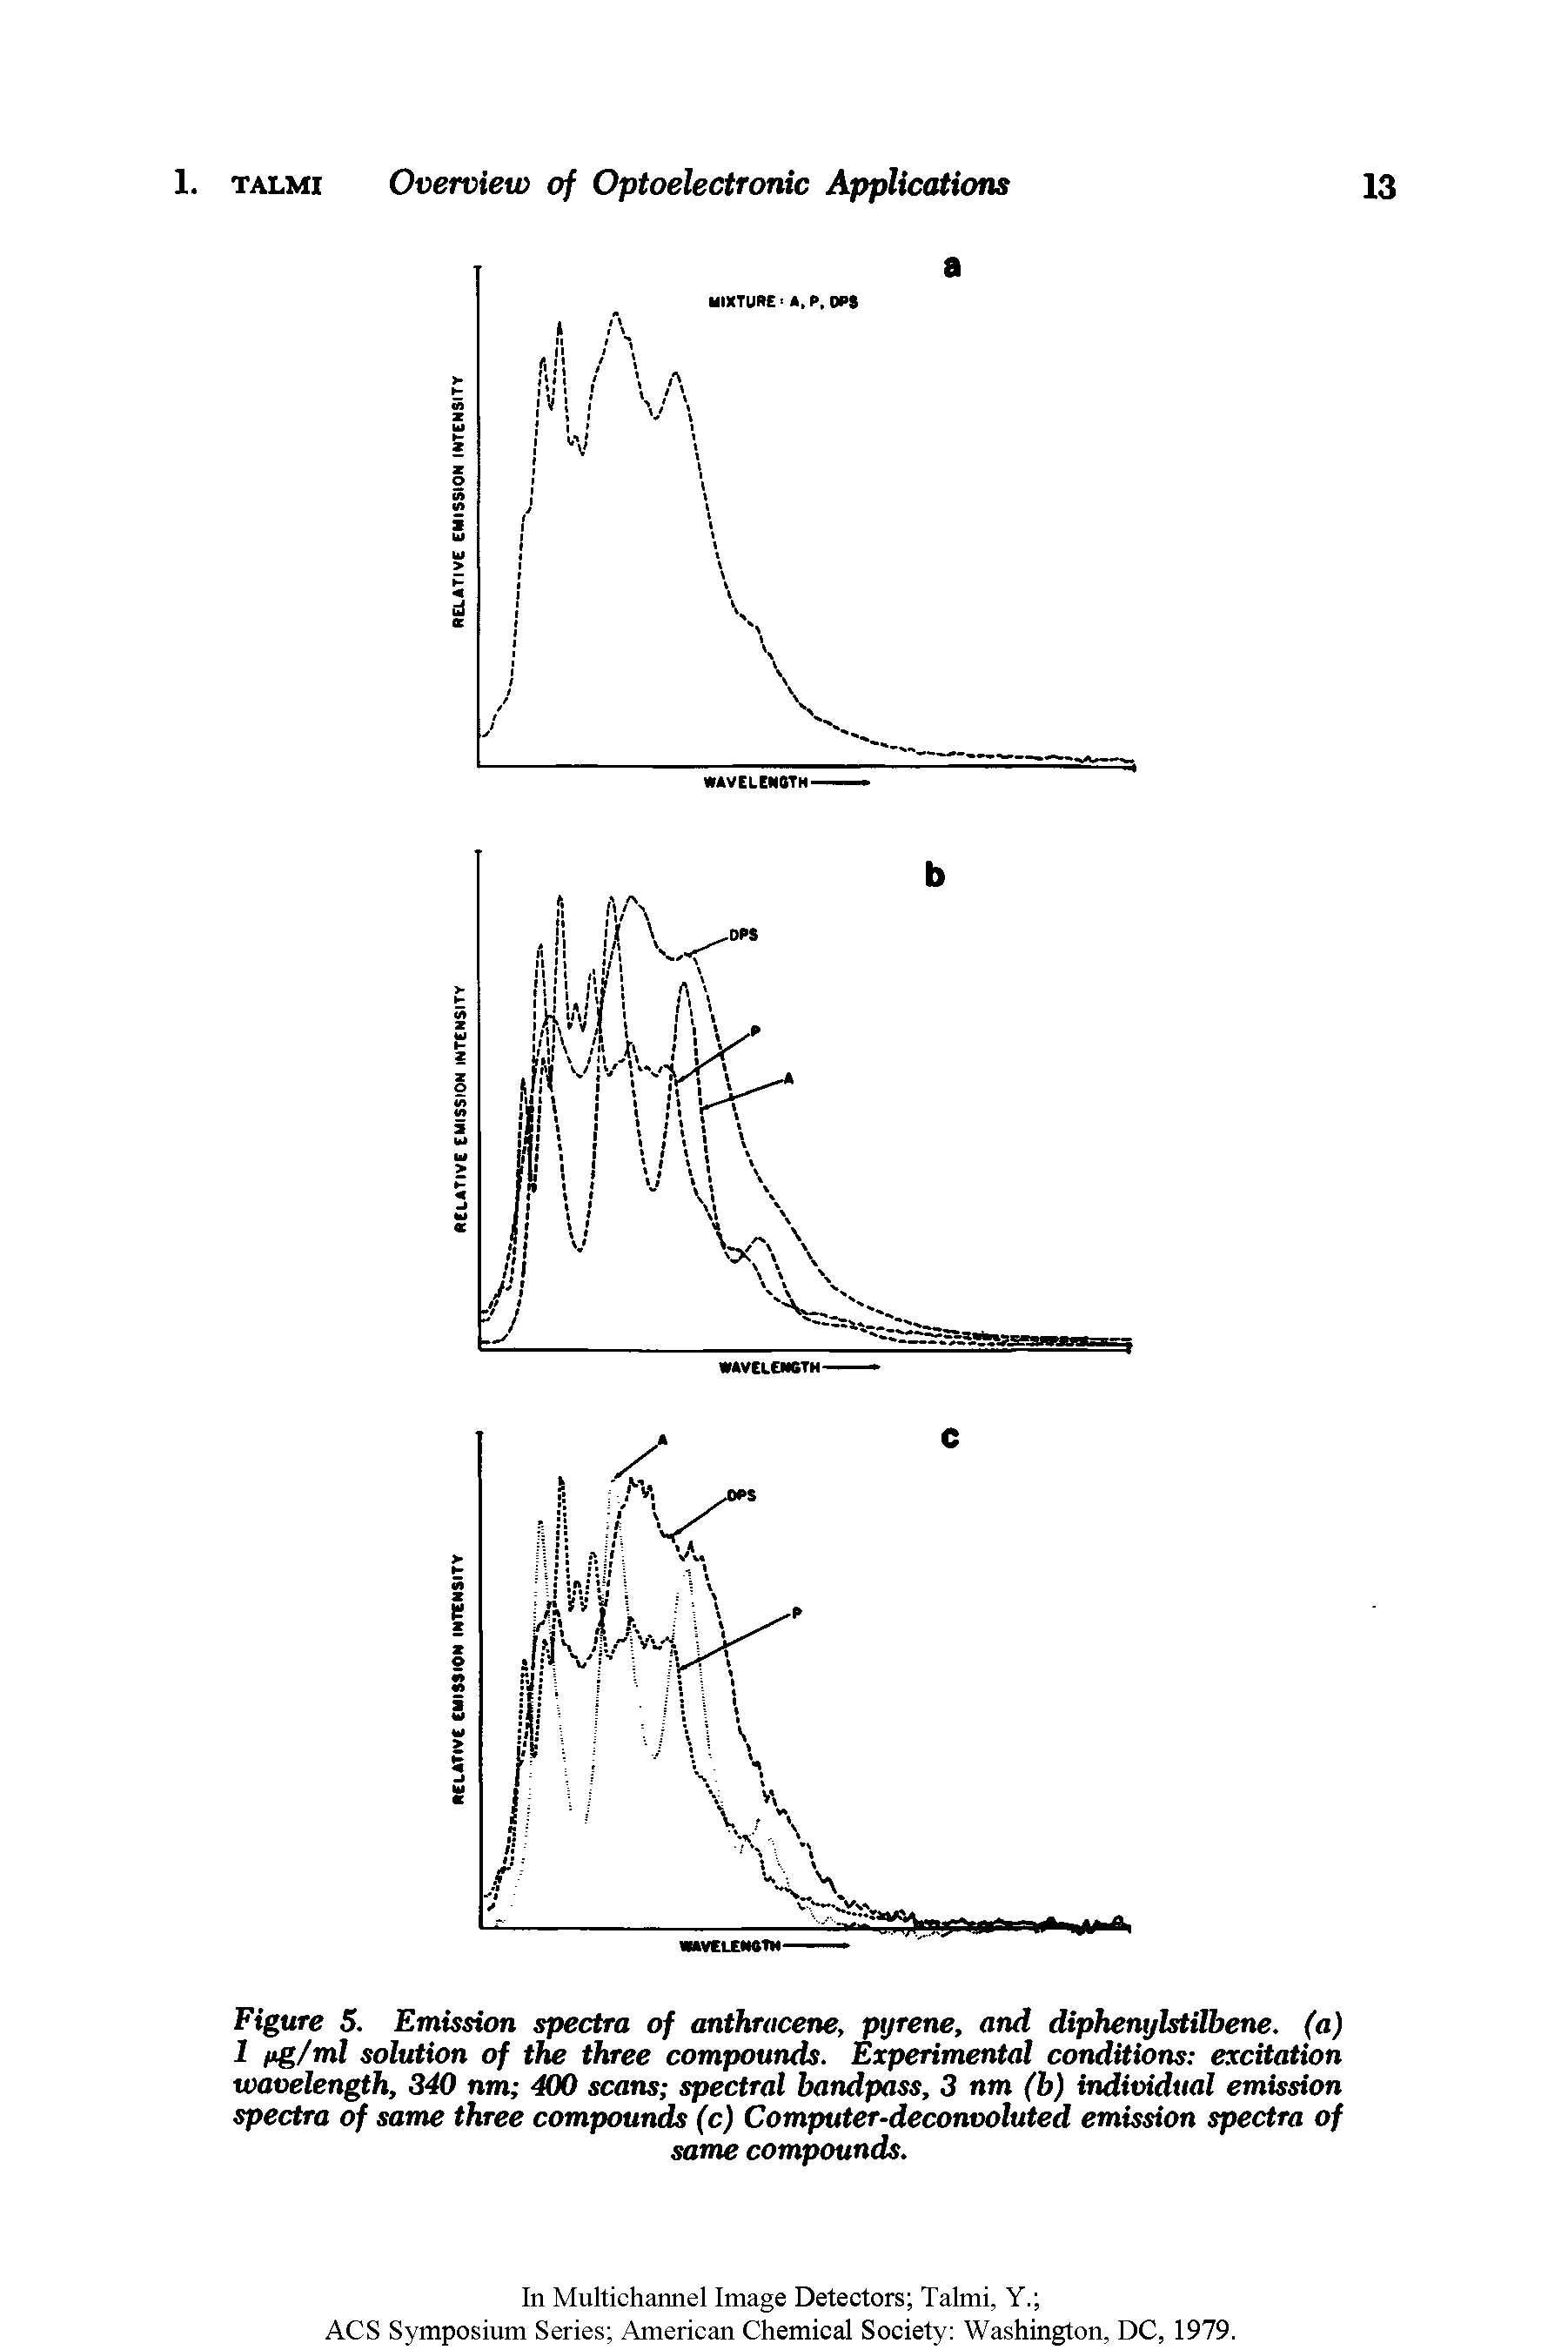 Figure 5. Emission spectra of anthracene, ptjrene, and diphenylstilbene. (a) 1 eg/ml solution of the three compounds. Experimental conditions excitation wavelength, 340 nm 400 scans spectral bandpass, 3 nm (b) individual emission spectra of same three compounds (c) Computer-deconvoluted emission spectra of...